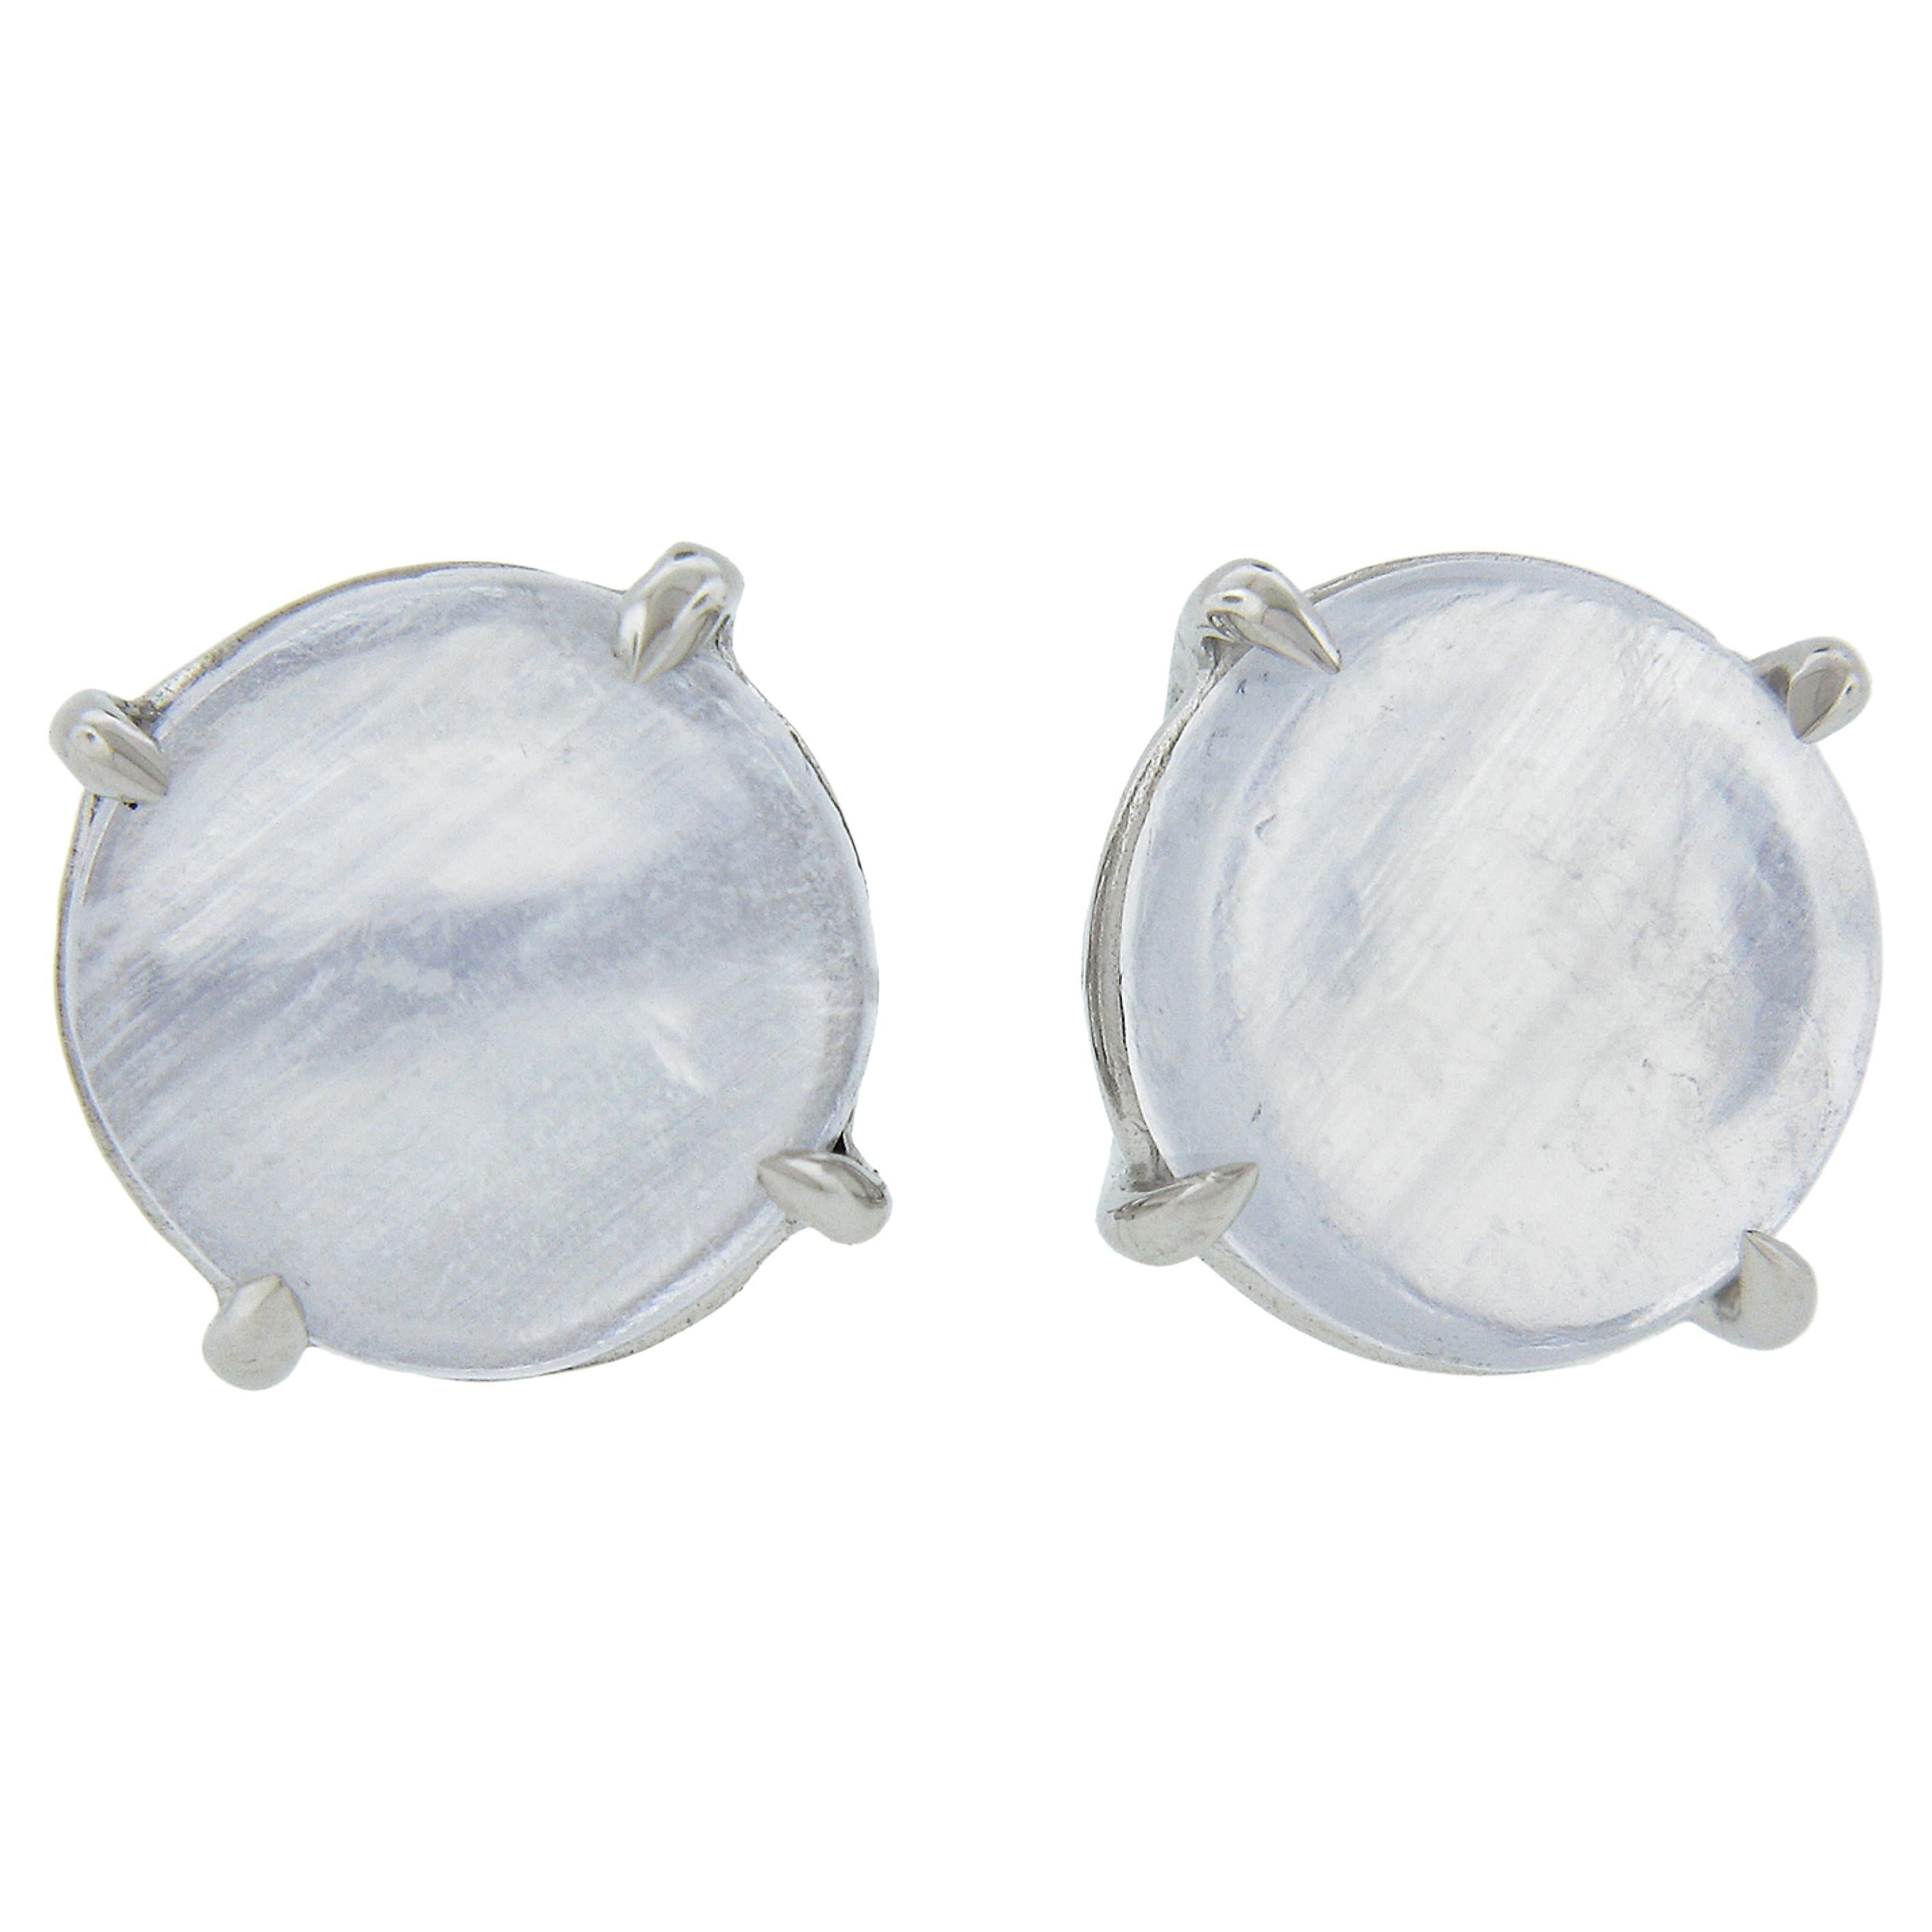 New 14k White Gold 3.54ctw Round Cabochon Blue Prong Set Moonstone Stud Earrings For Sale